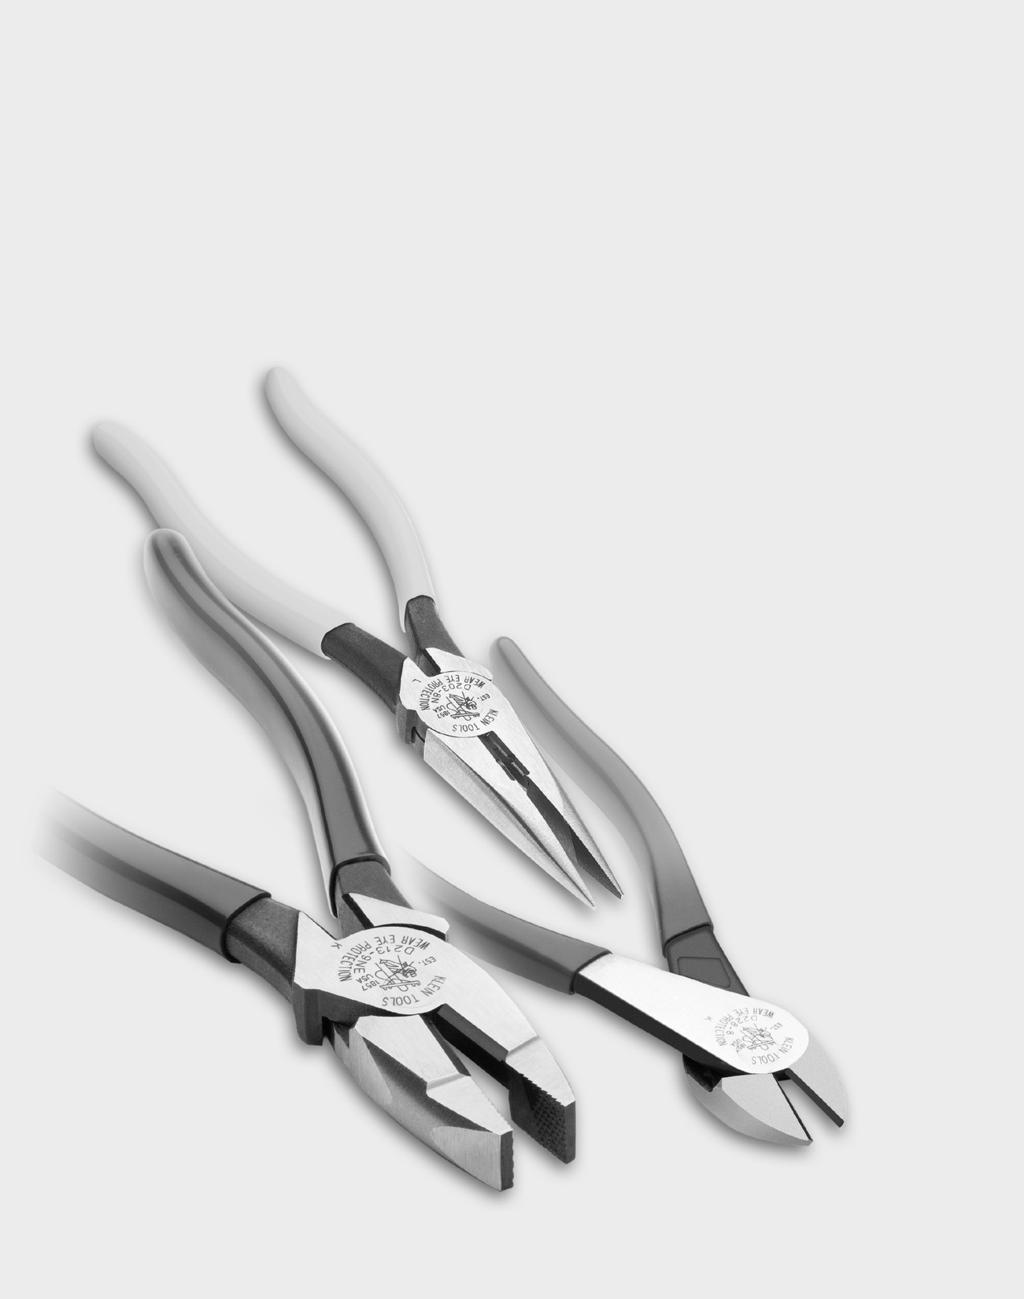 F o r P Klein r o f e s s i o Klein specializes in the making of the world s finest pliers pliers that professionals trust completely. Klein pliers feel right and work right.